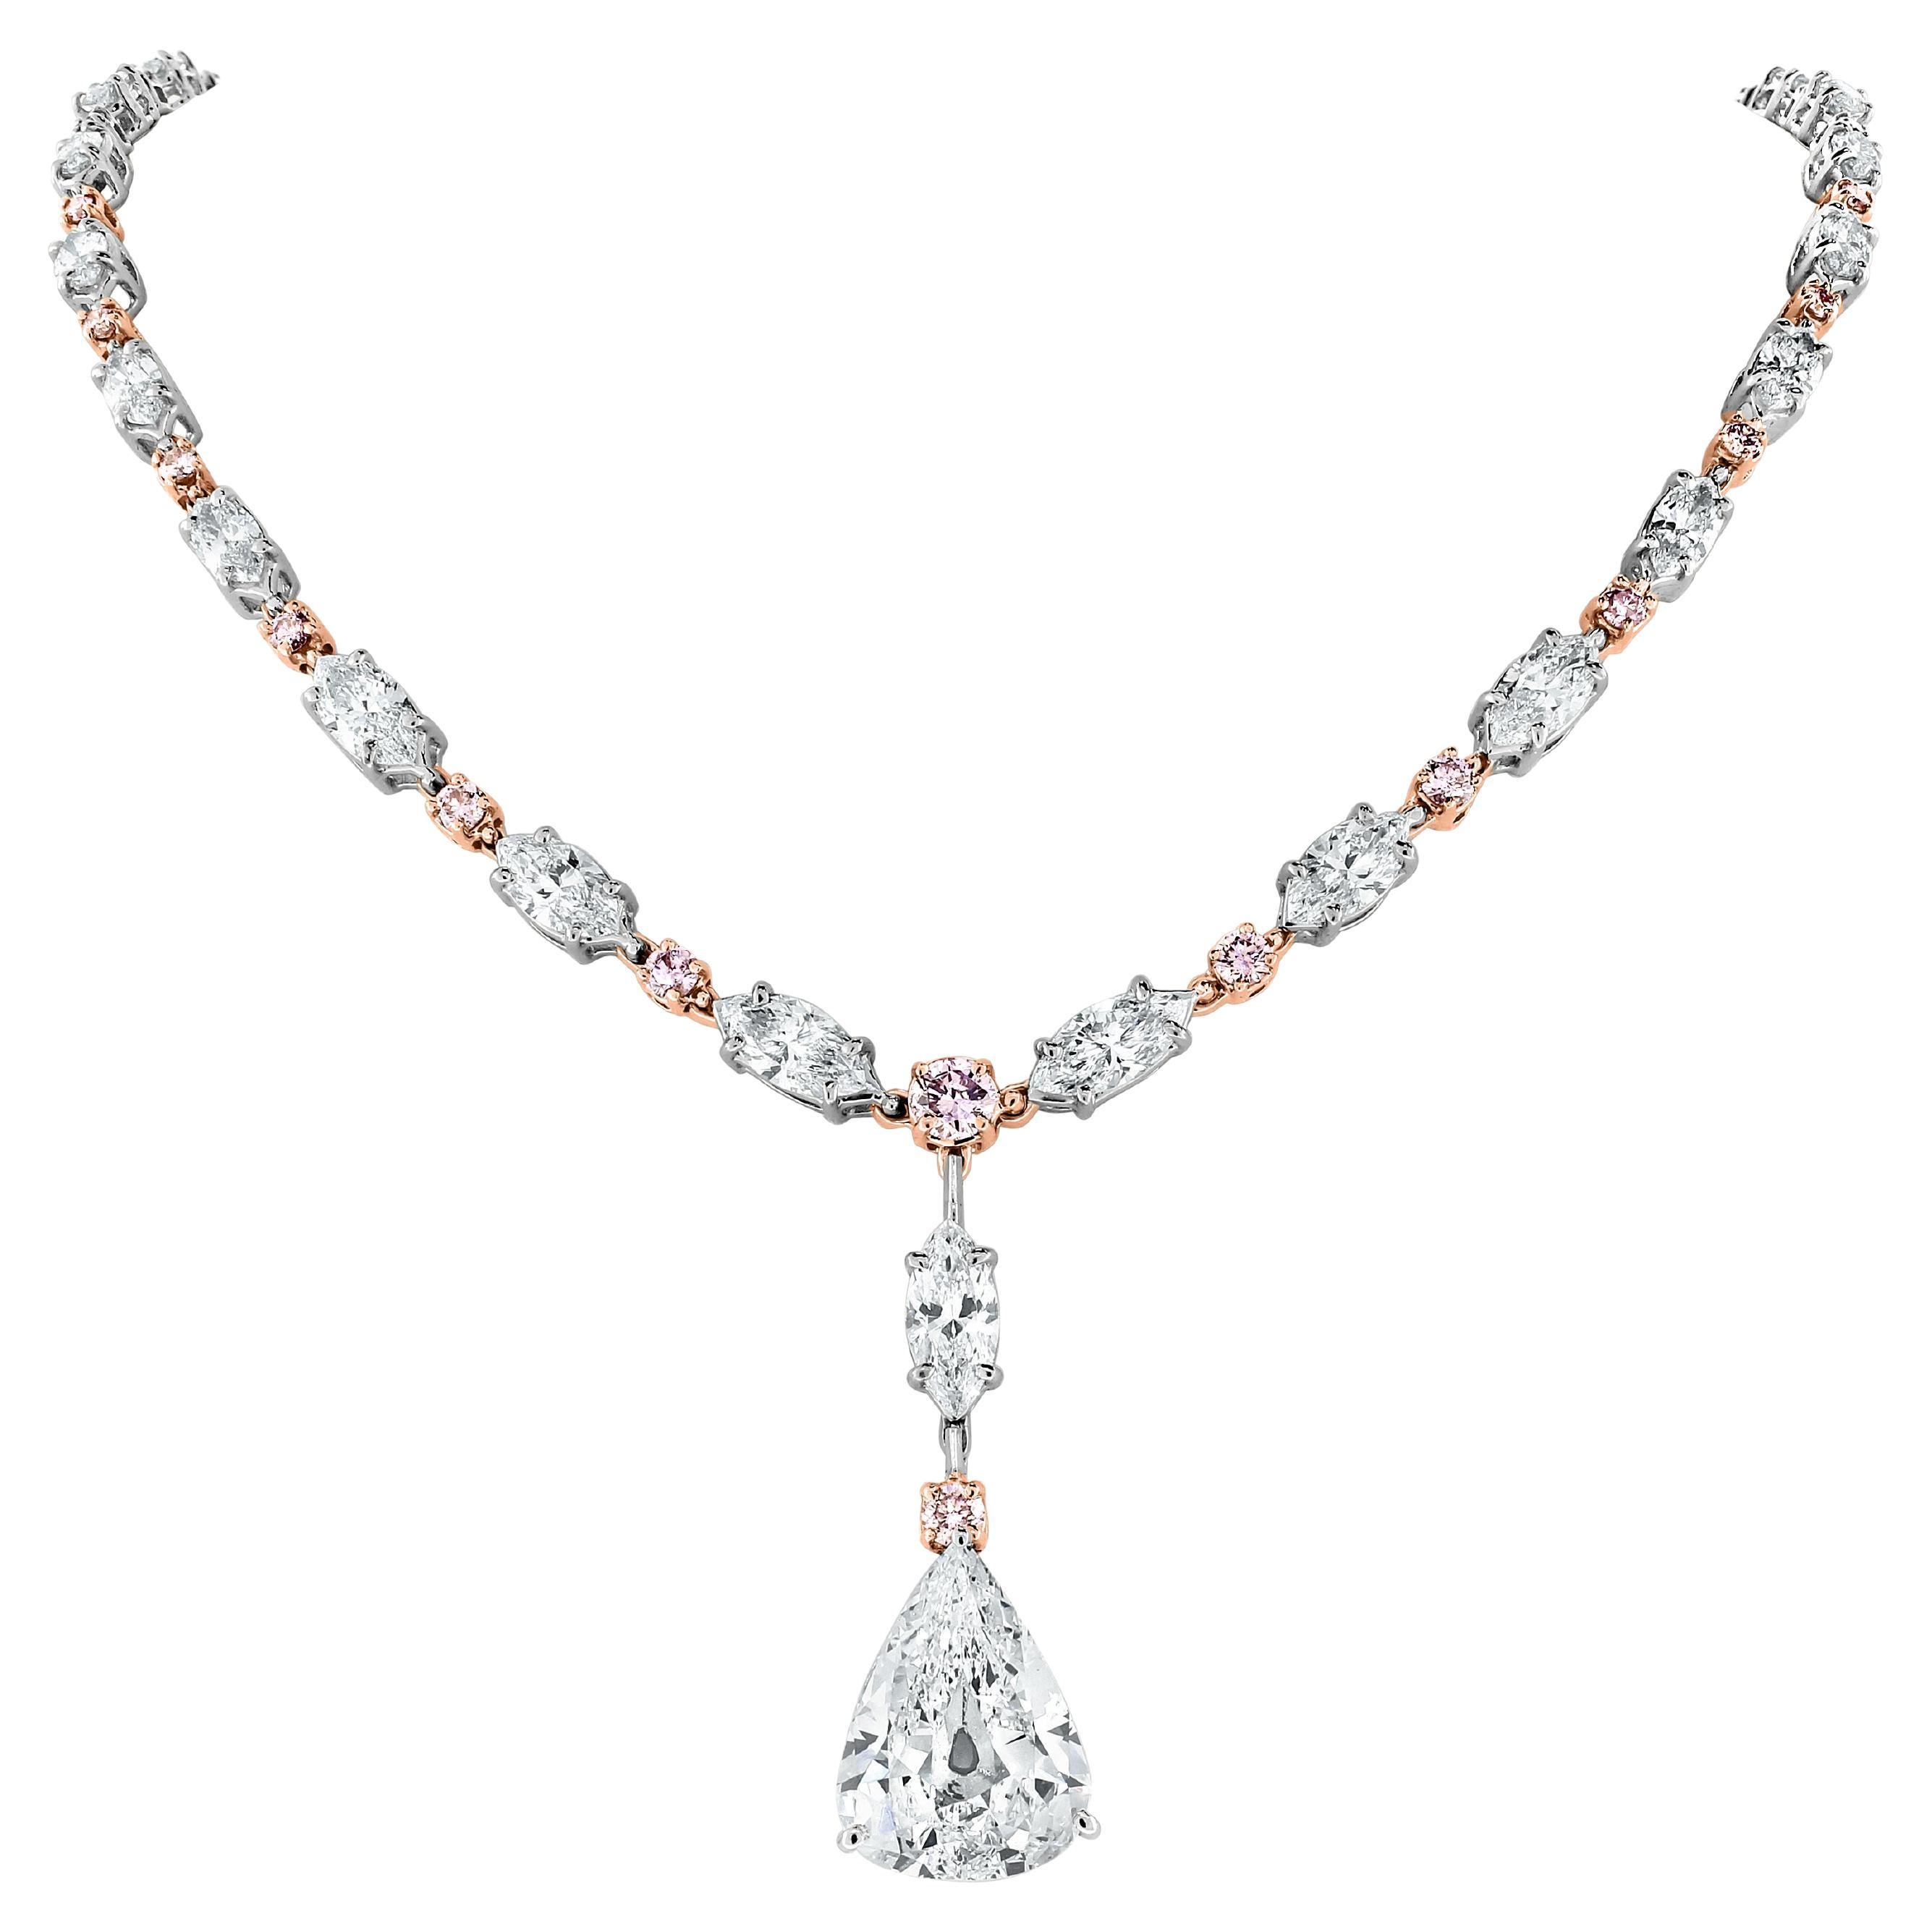 Beauvince Ariana Diamond Necklace, '17.76 Ct Diamonds', in Gold For Sale